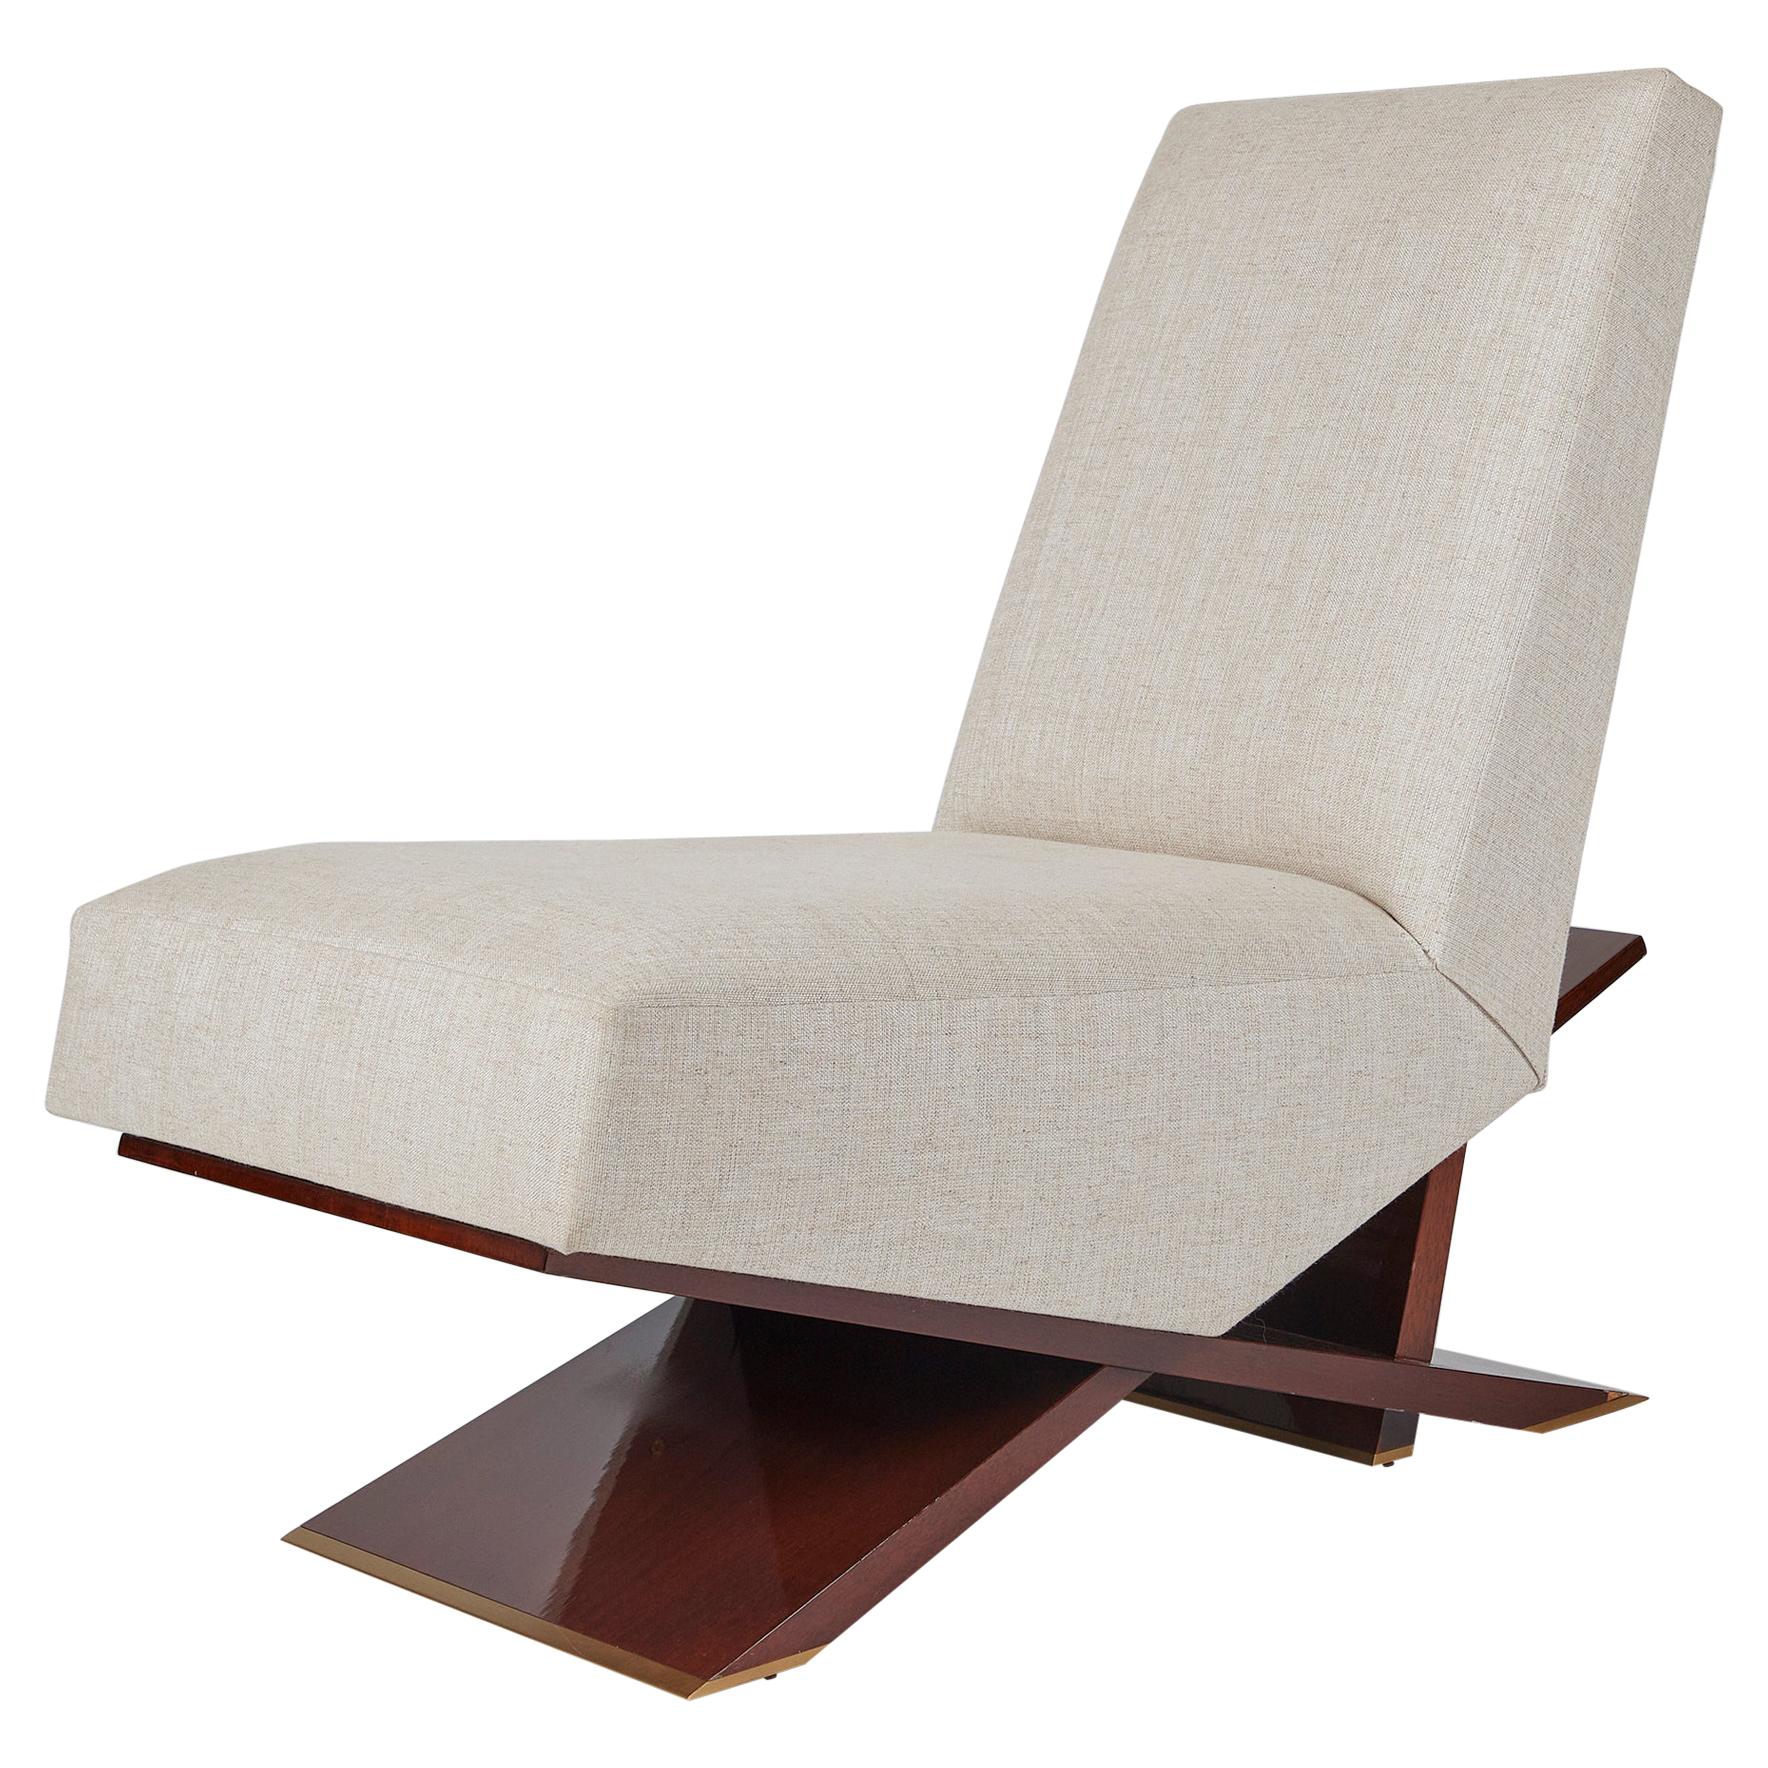 Thomas Pheasant, Equipoise, Contemporary Lounge Chair, United, 2020